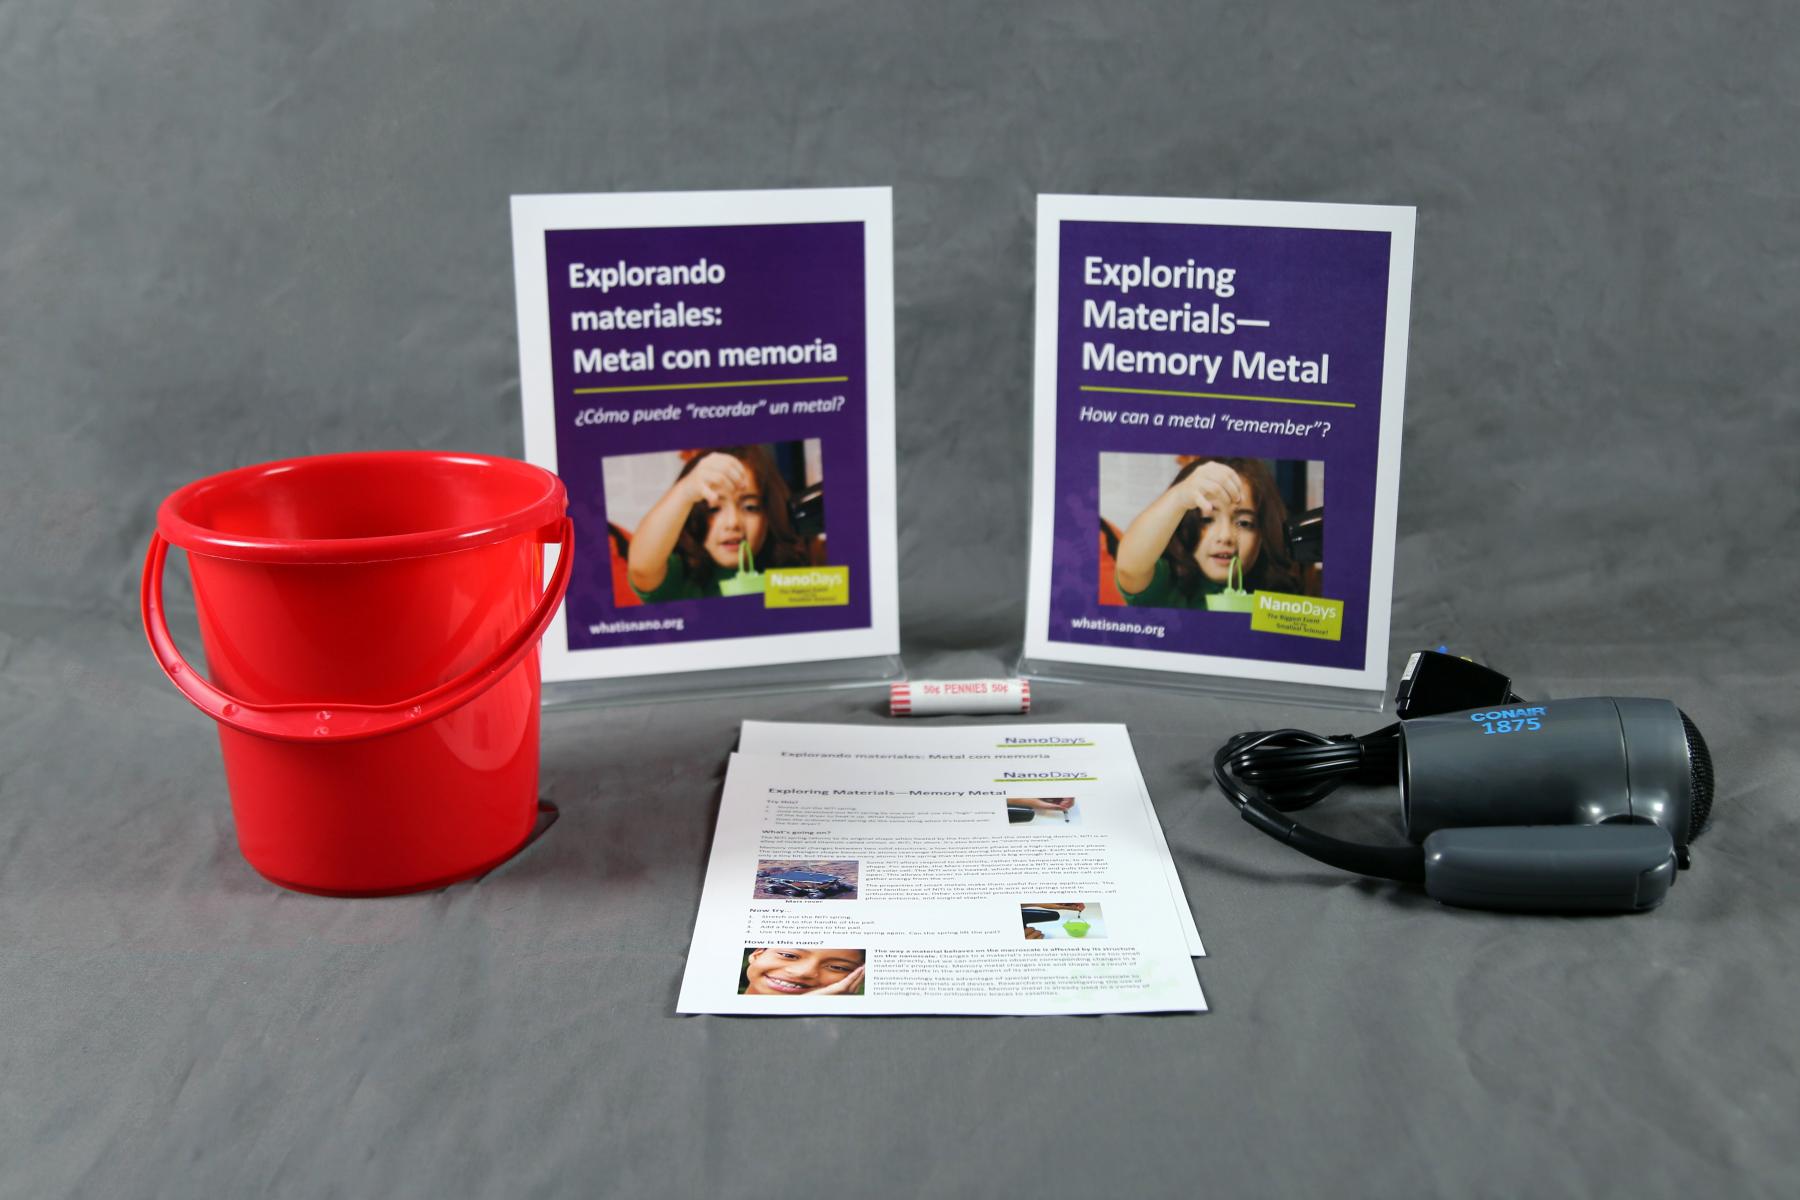 Memory Metal activity components including signs, guides, hair dryer, memory metal, and bucket.